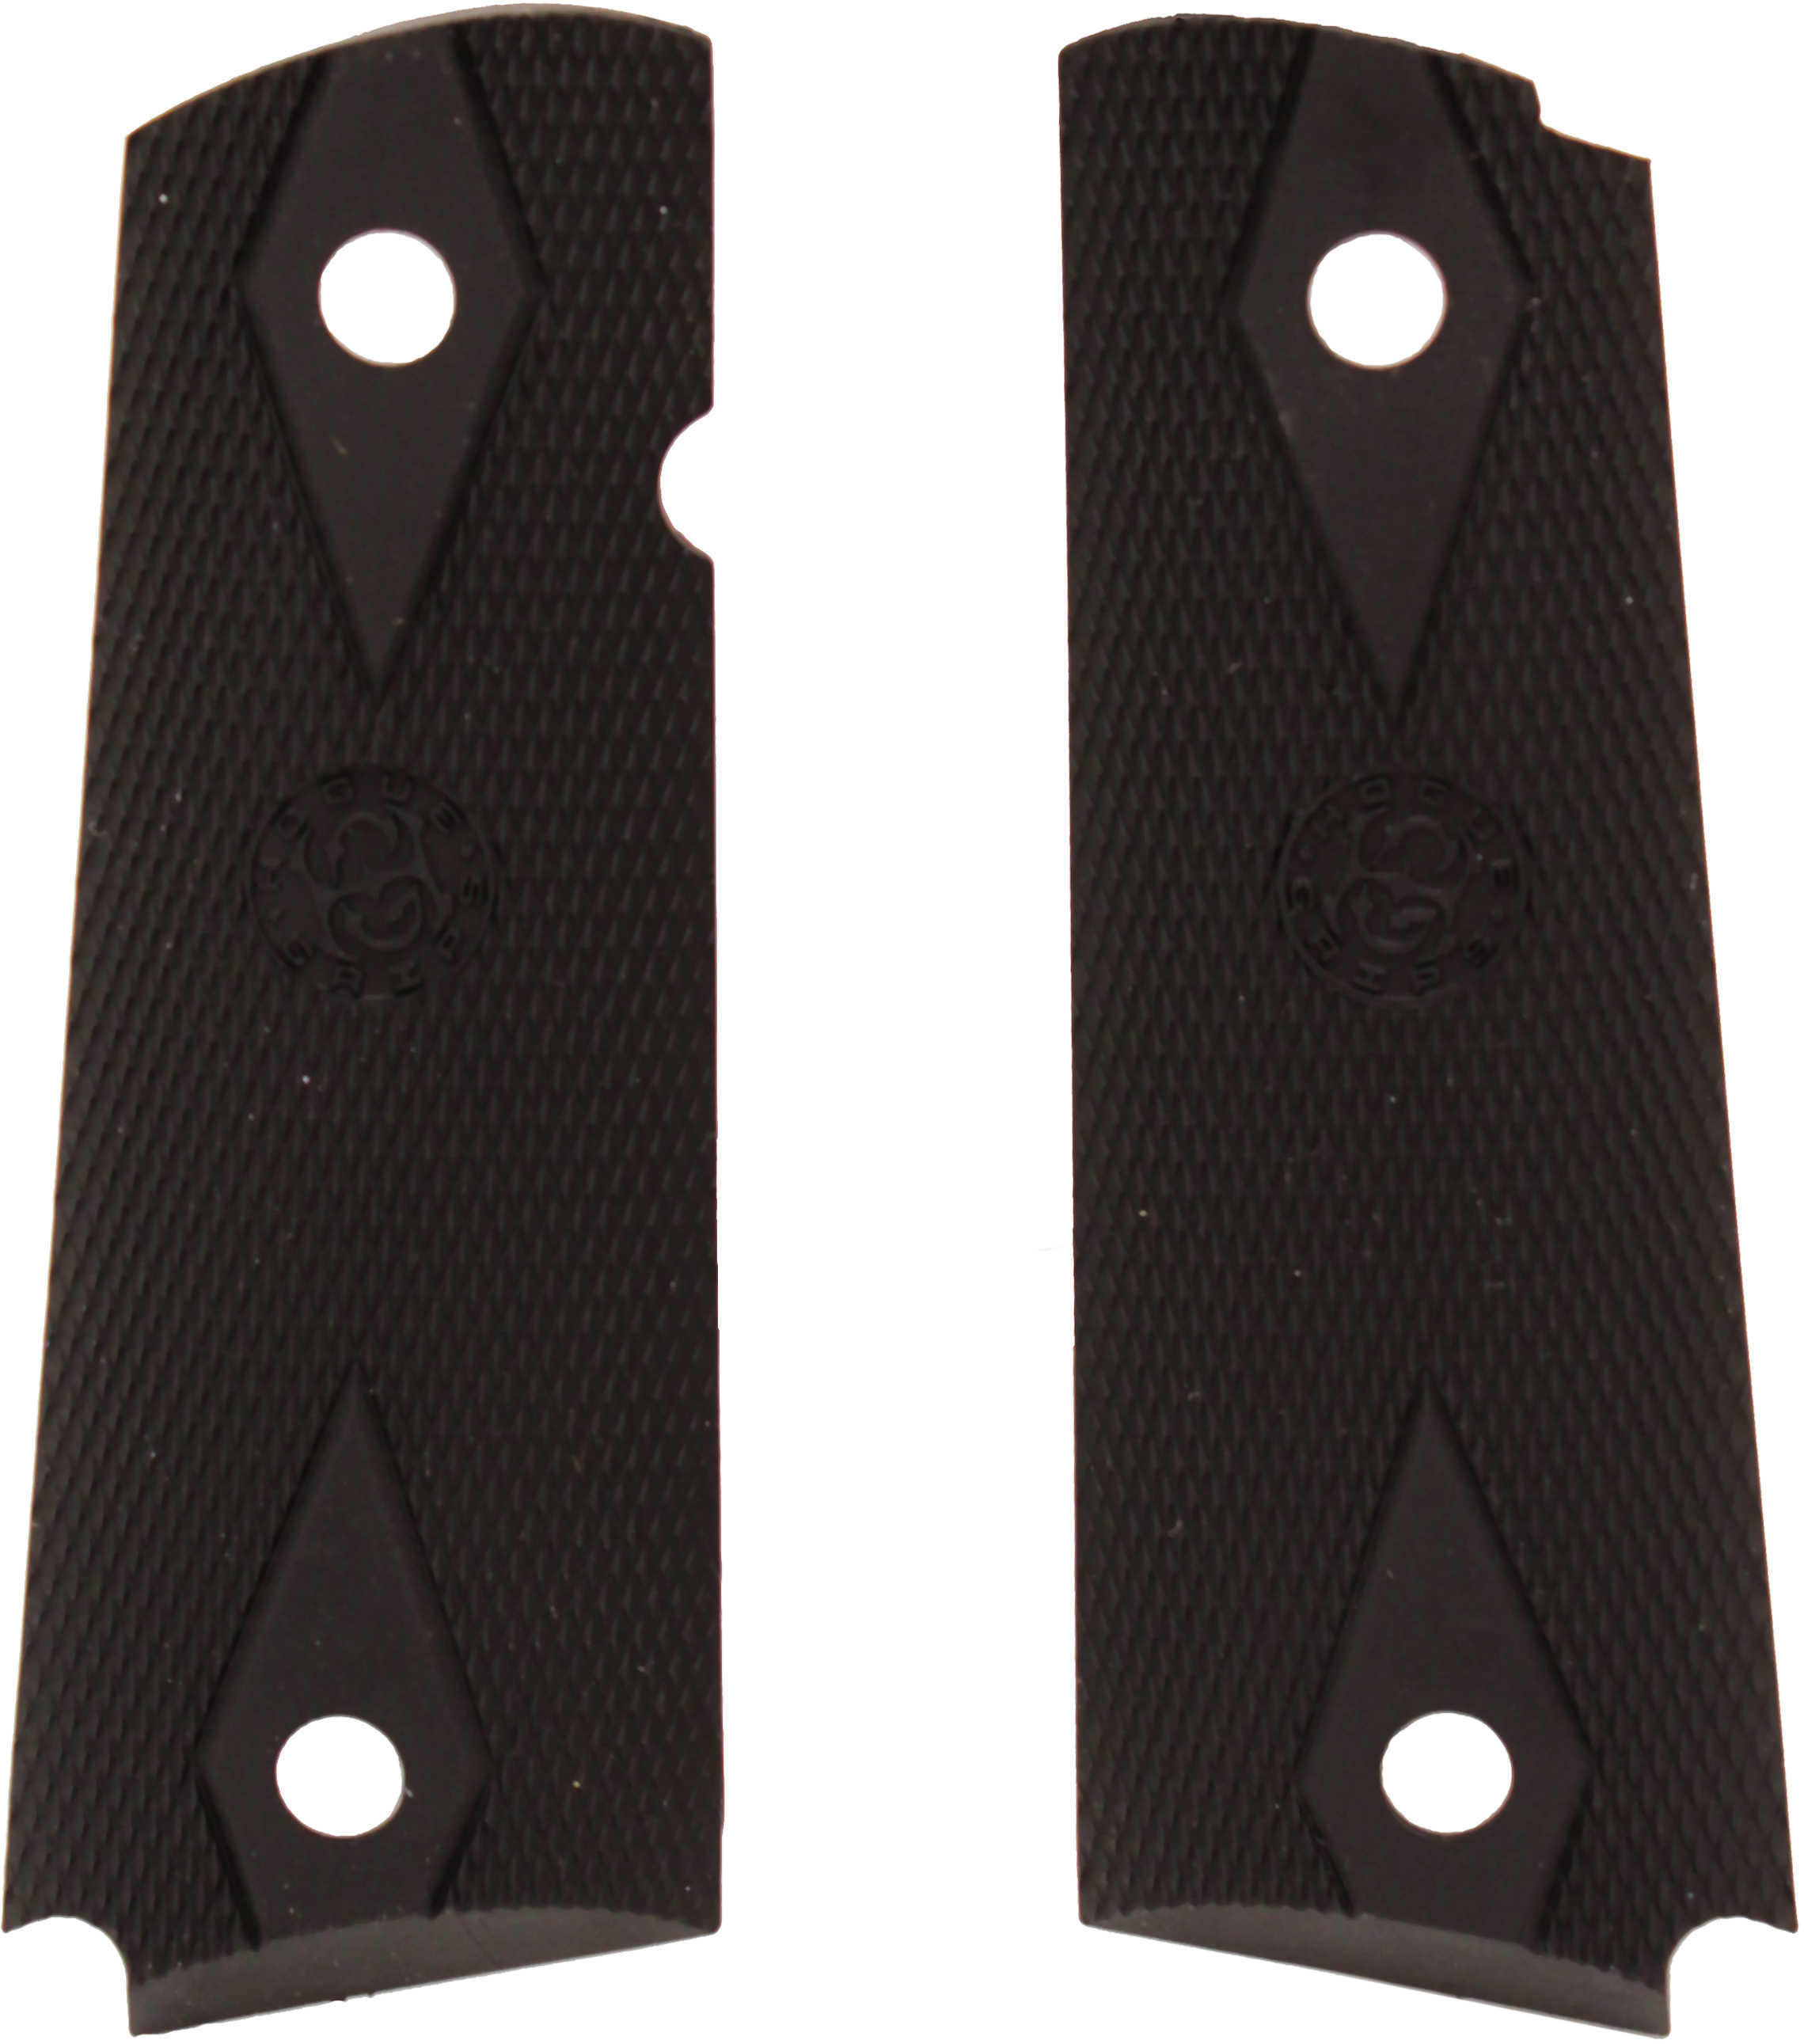 Hogue Colt Government Rubber Grip Panels, Checkered with Diamonds Black 45010